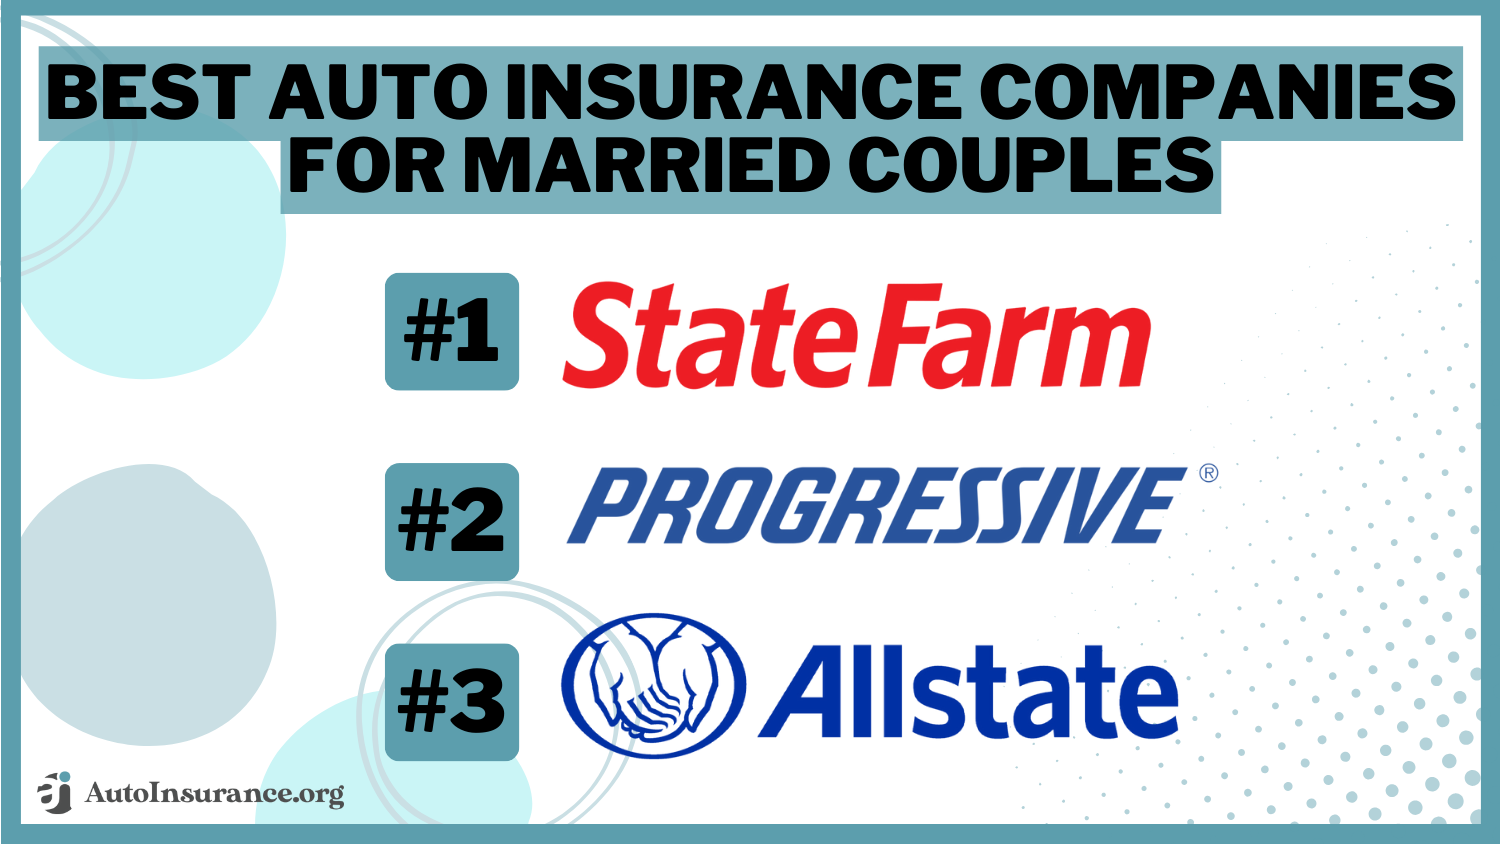 best auto insurance companies for married couples: State Farm, Progressive, Allstate